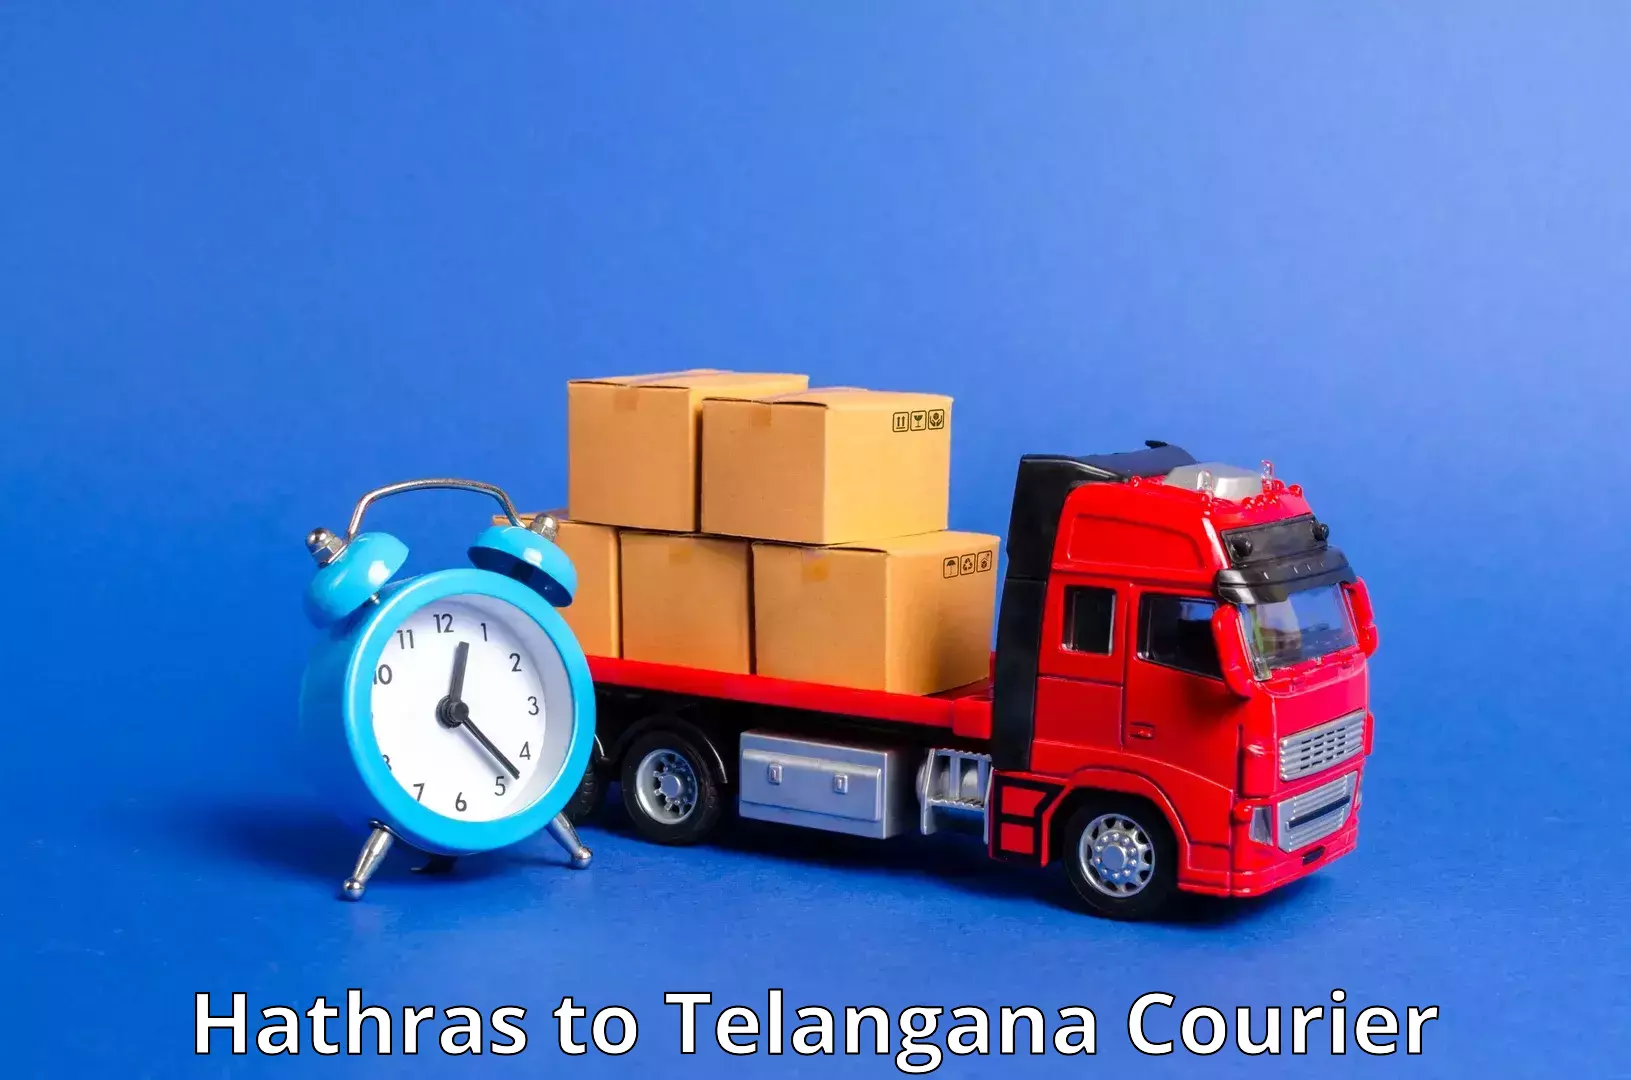 Secure shipping methods Hathras to Sultanabad